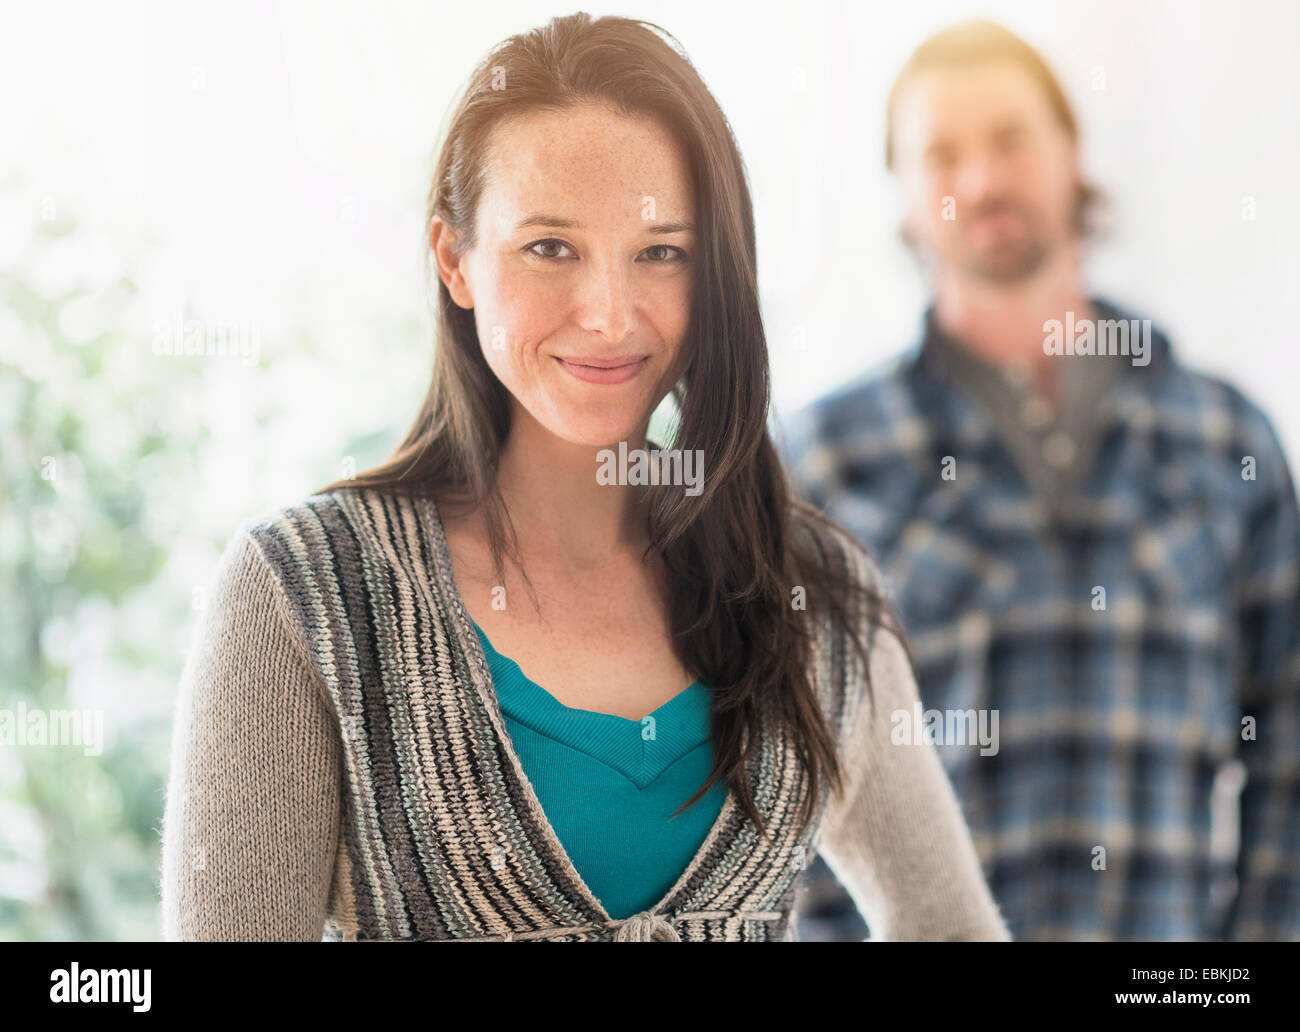 Smiling woman looking at camera, man in background Stock Photo